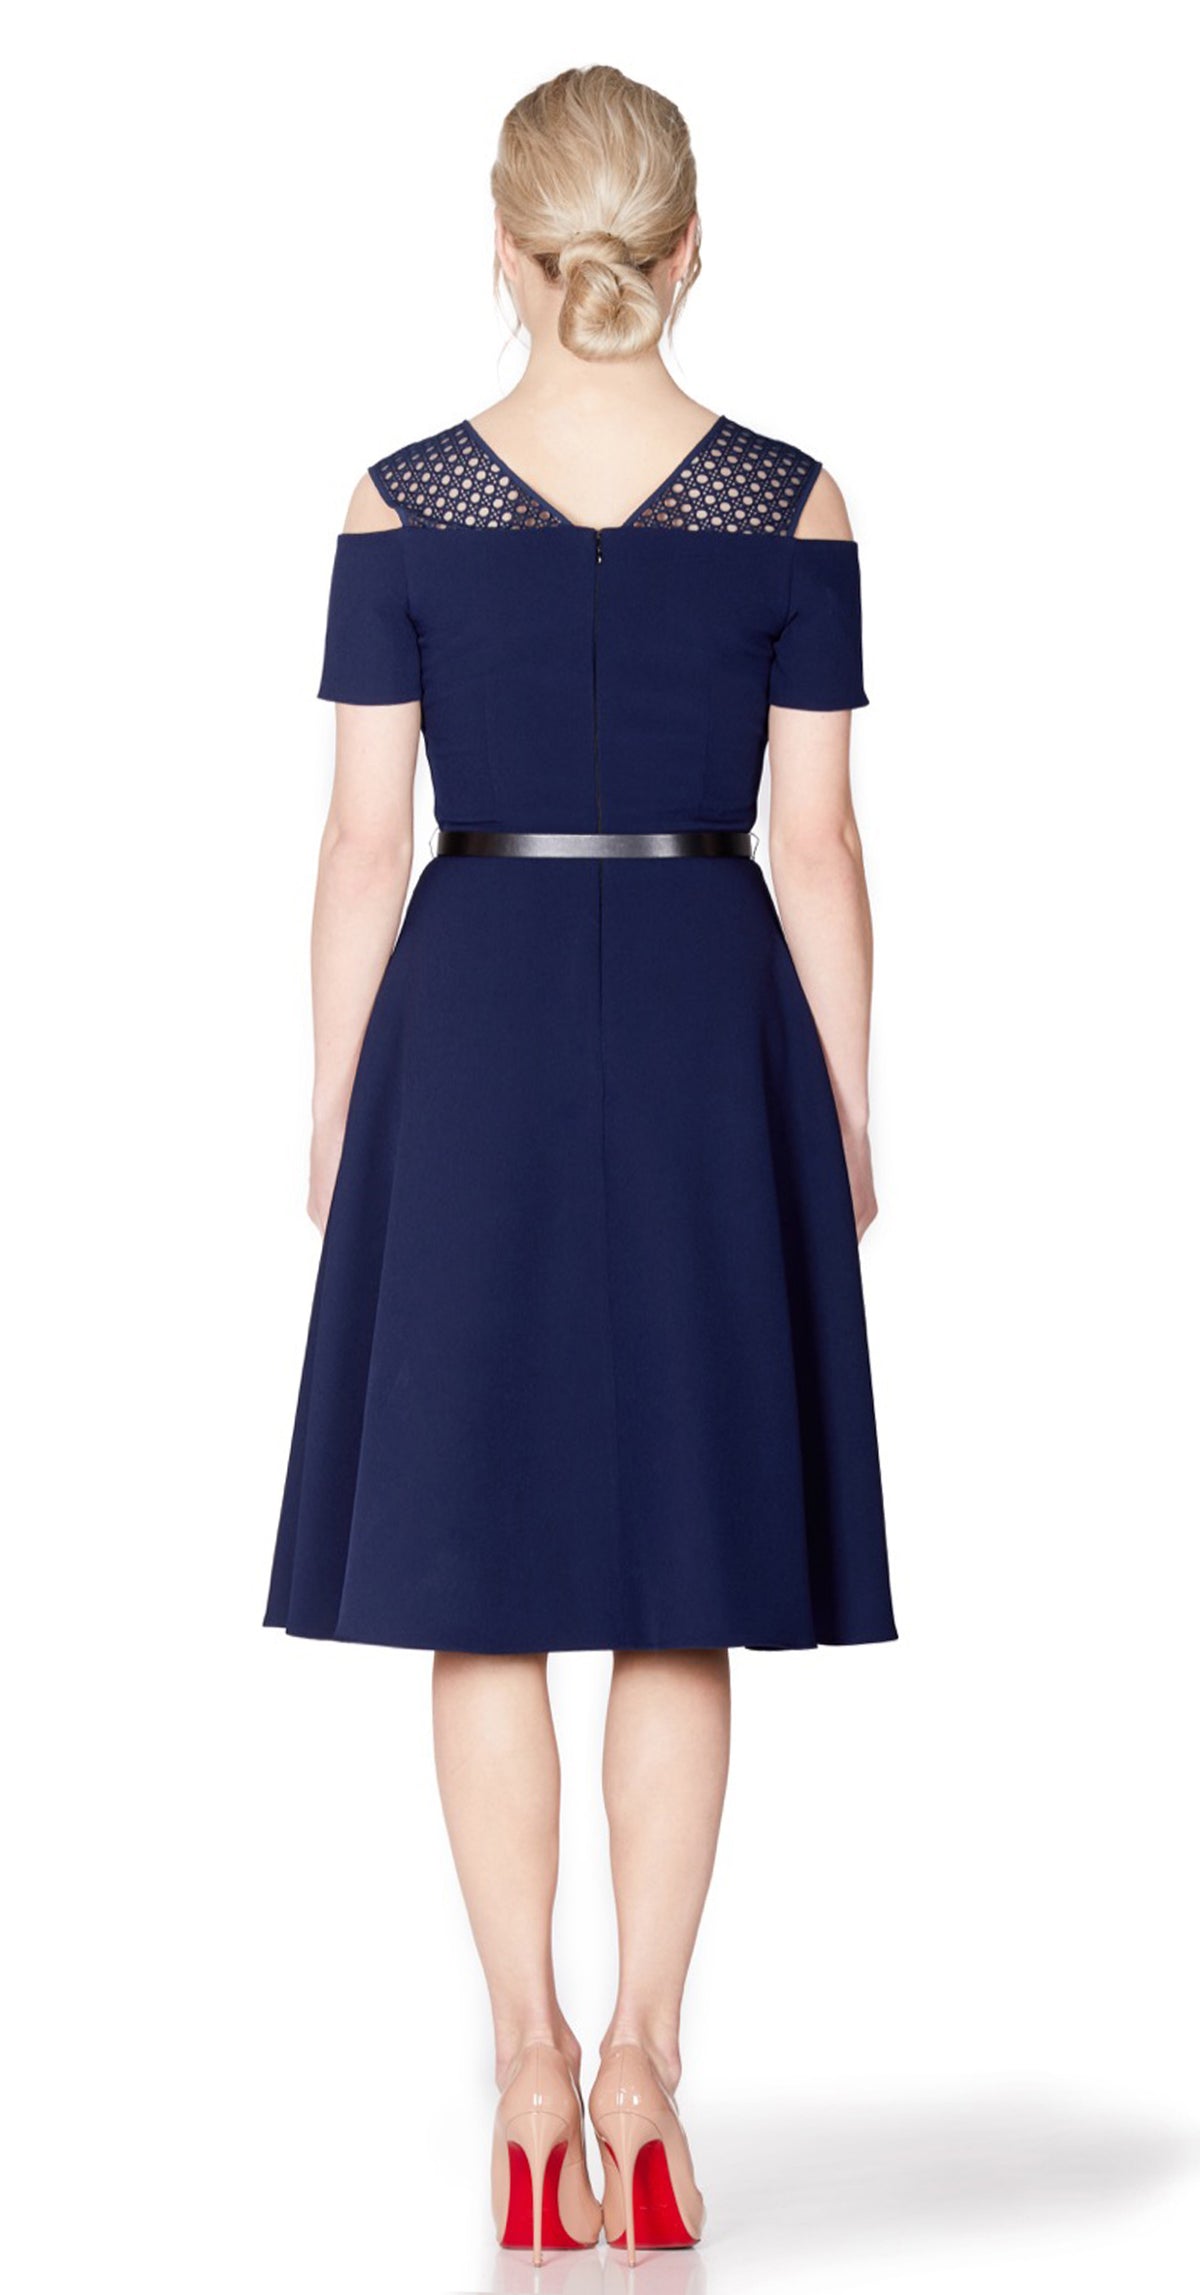 Iviron Dress DRC223 Navy/Lace Contrast With Belt